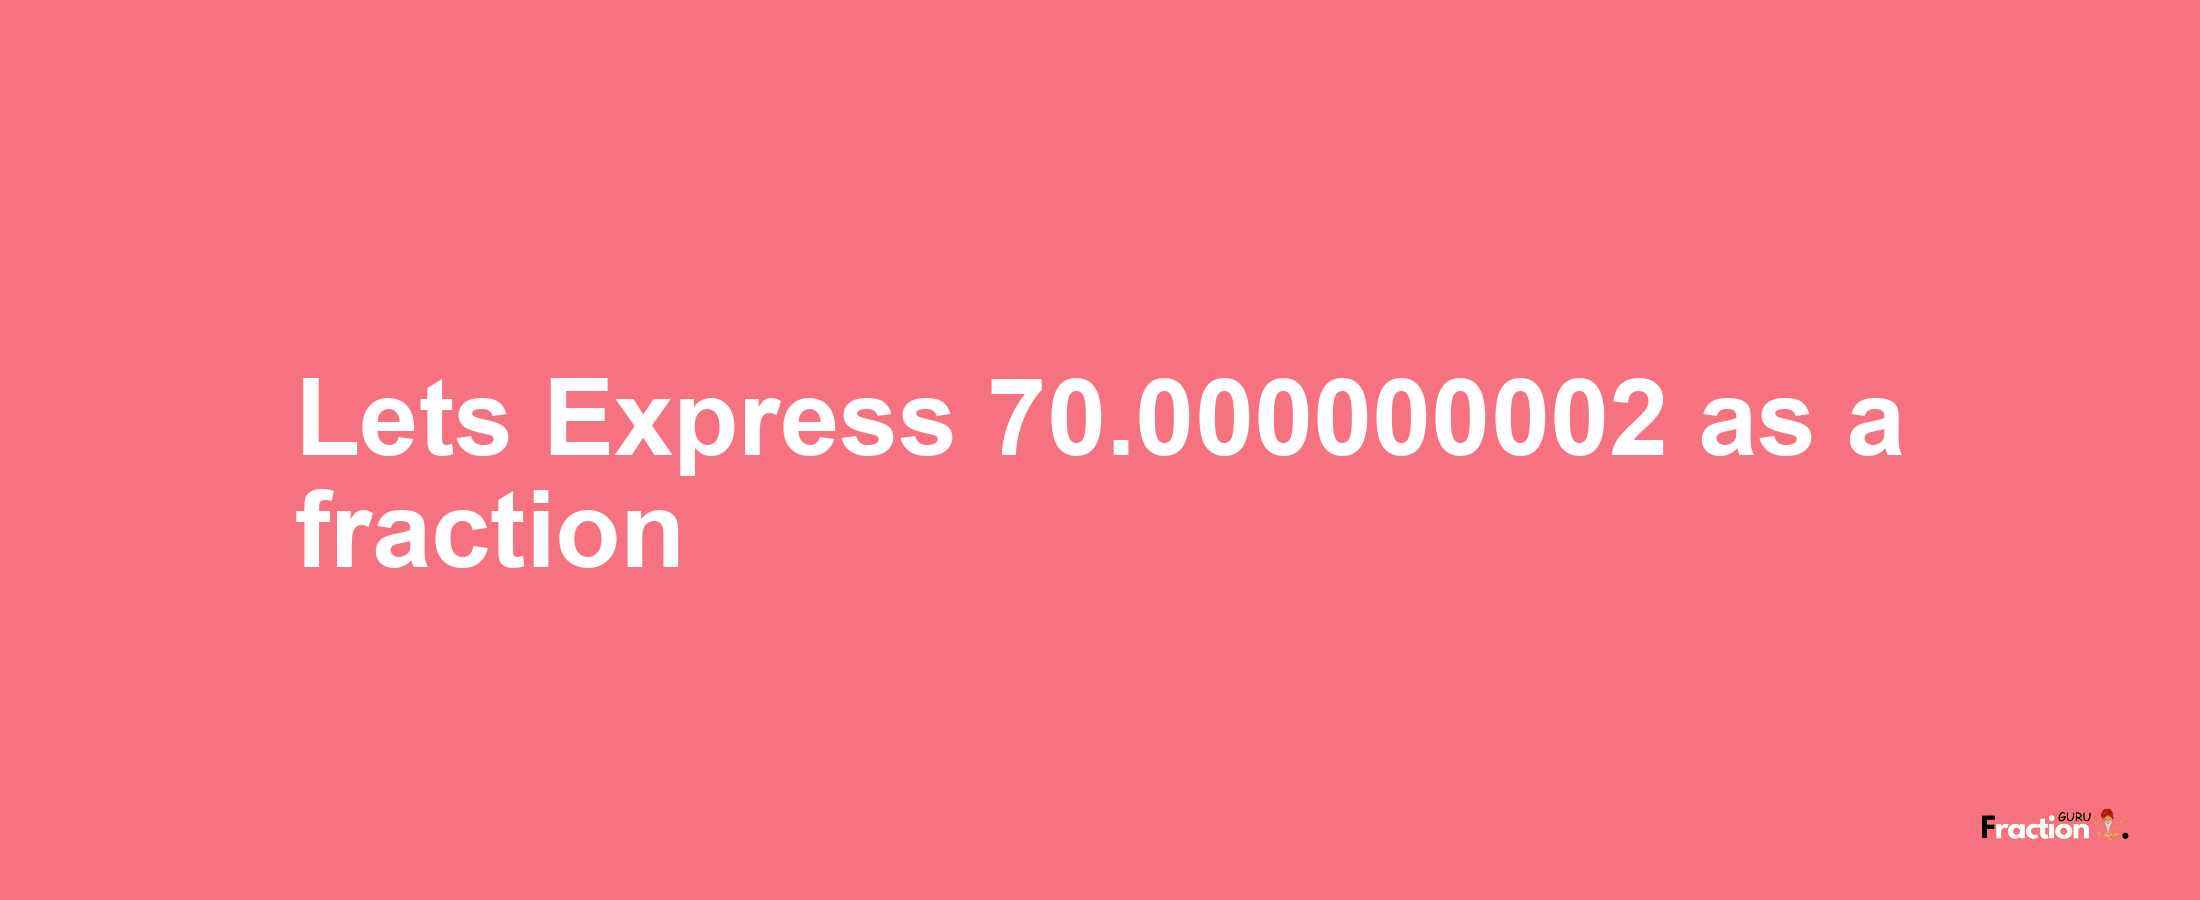 Lets Express 70.000000002 as afraction